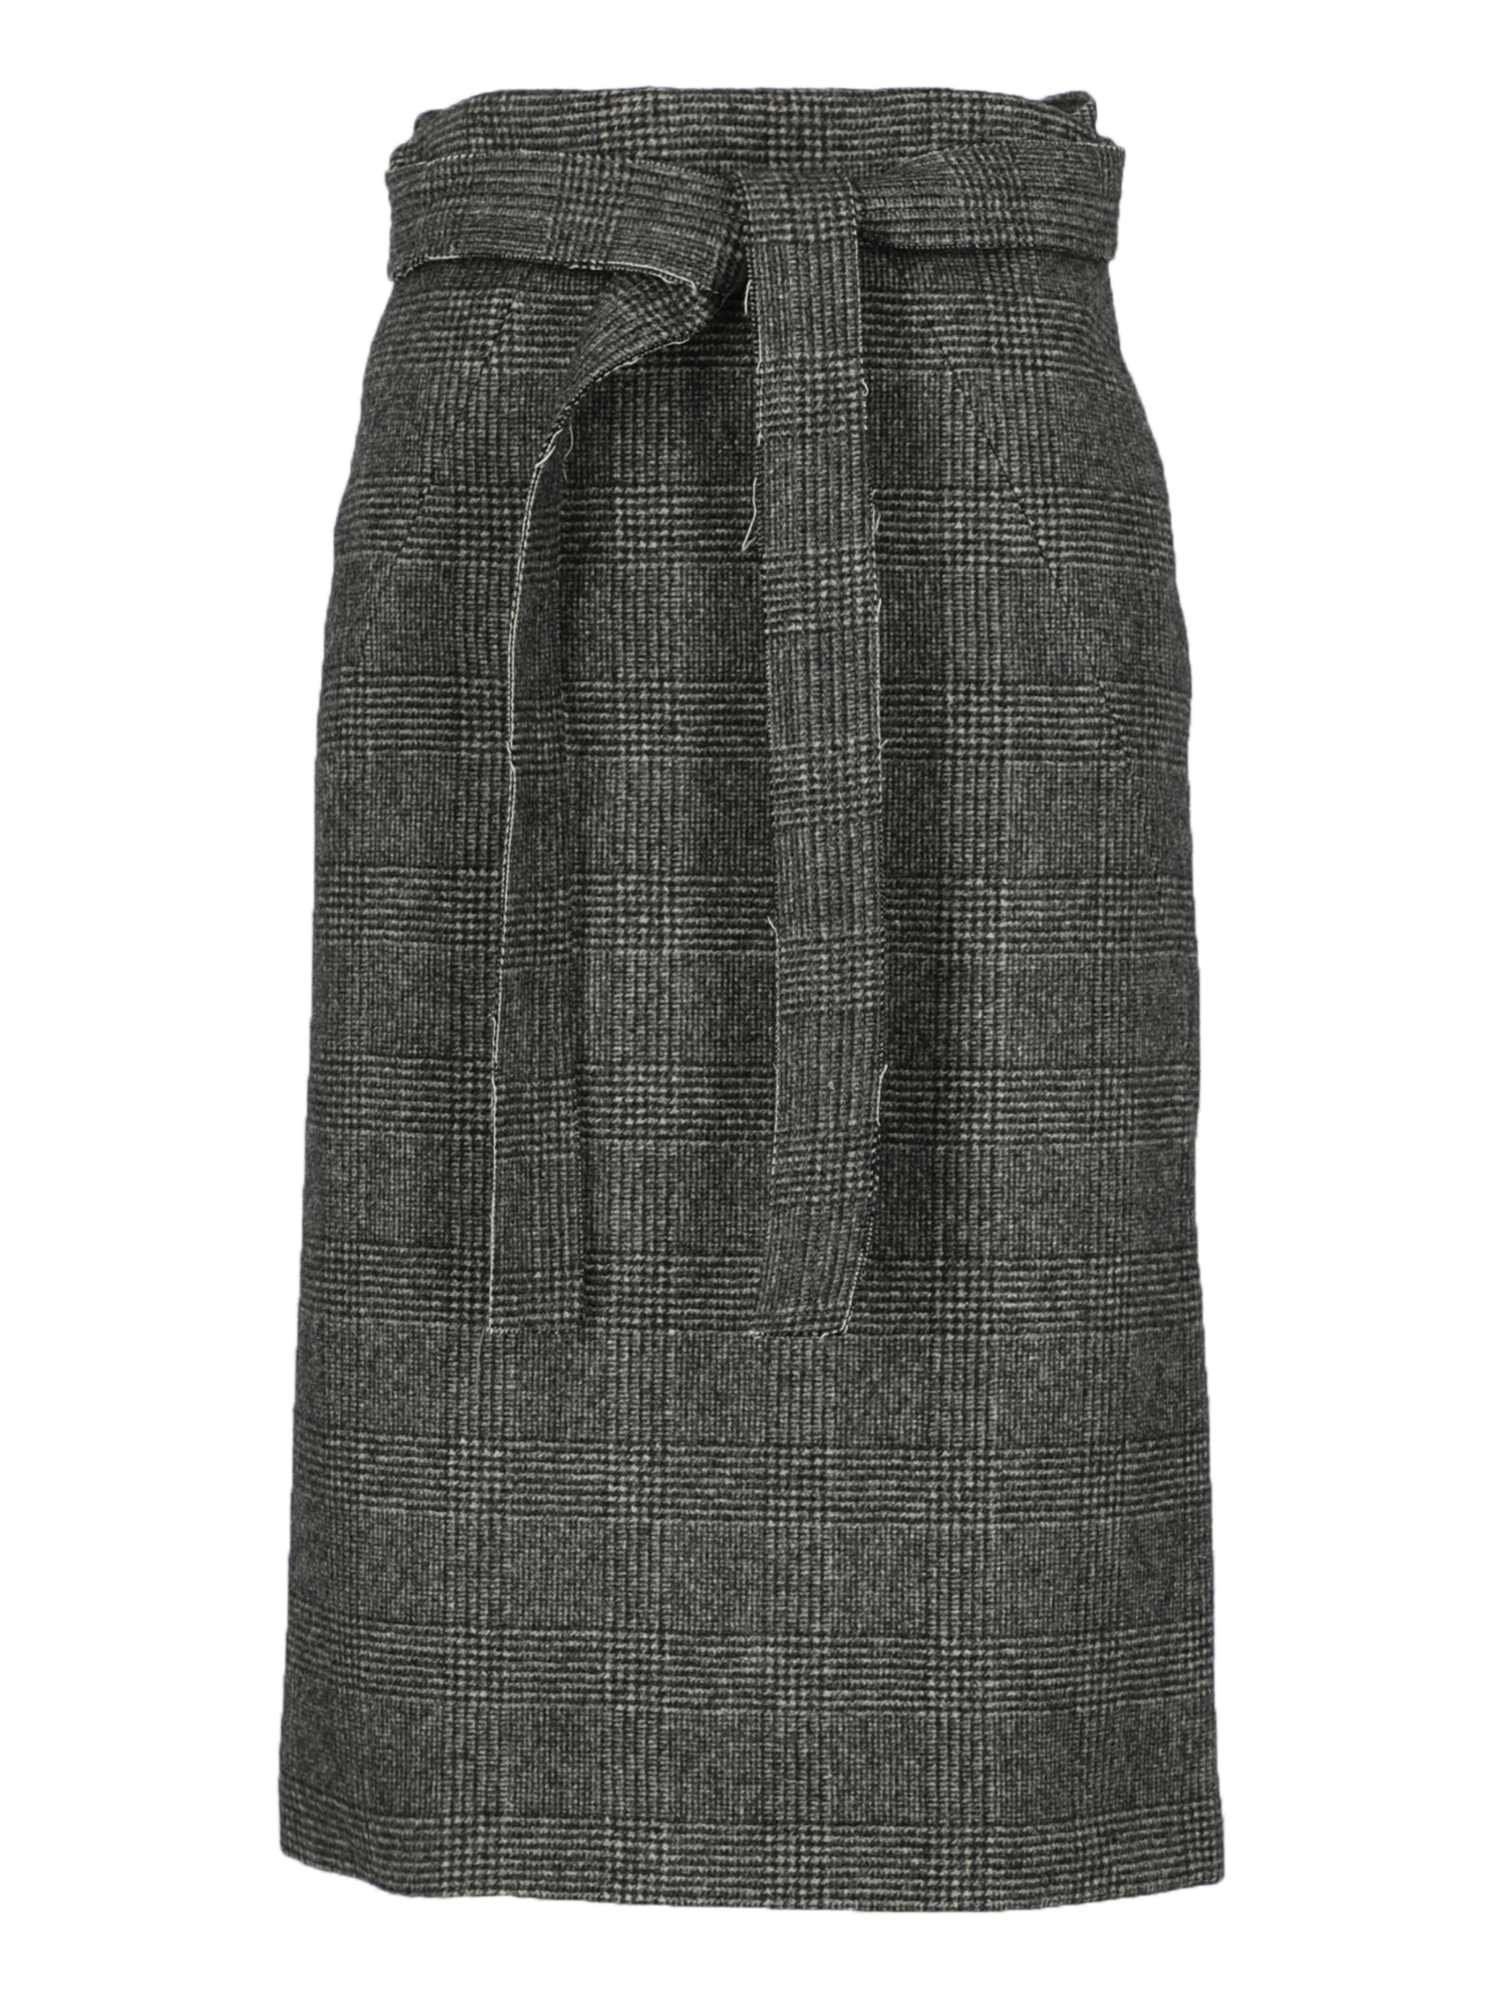 Condition: Good, Glencheck Pattern Wool, Color: Grey - XS - IT 38 -